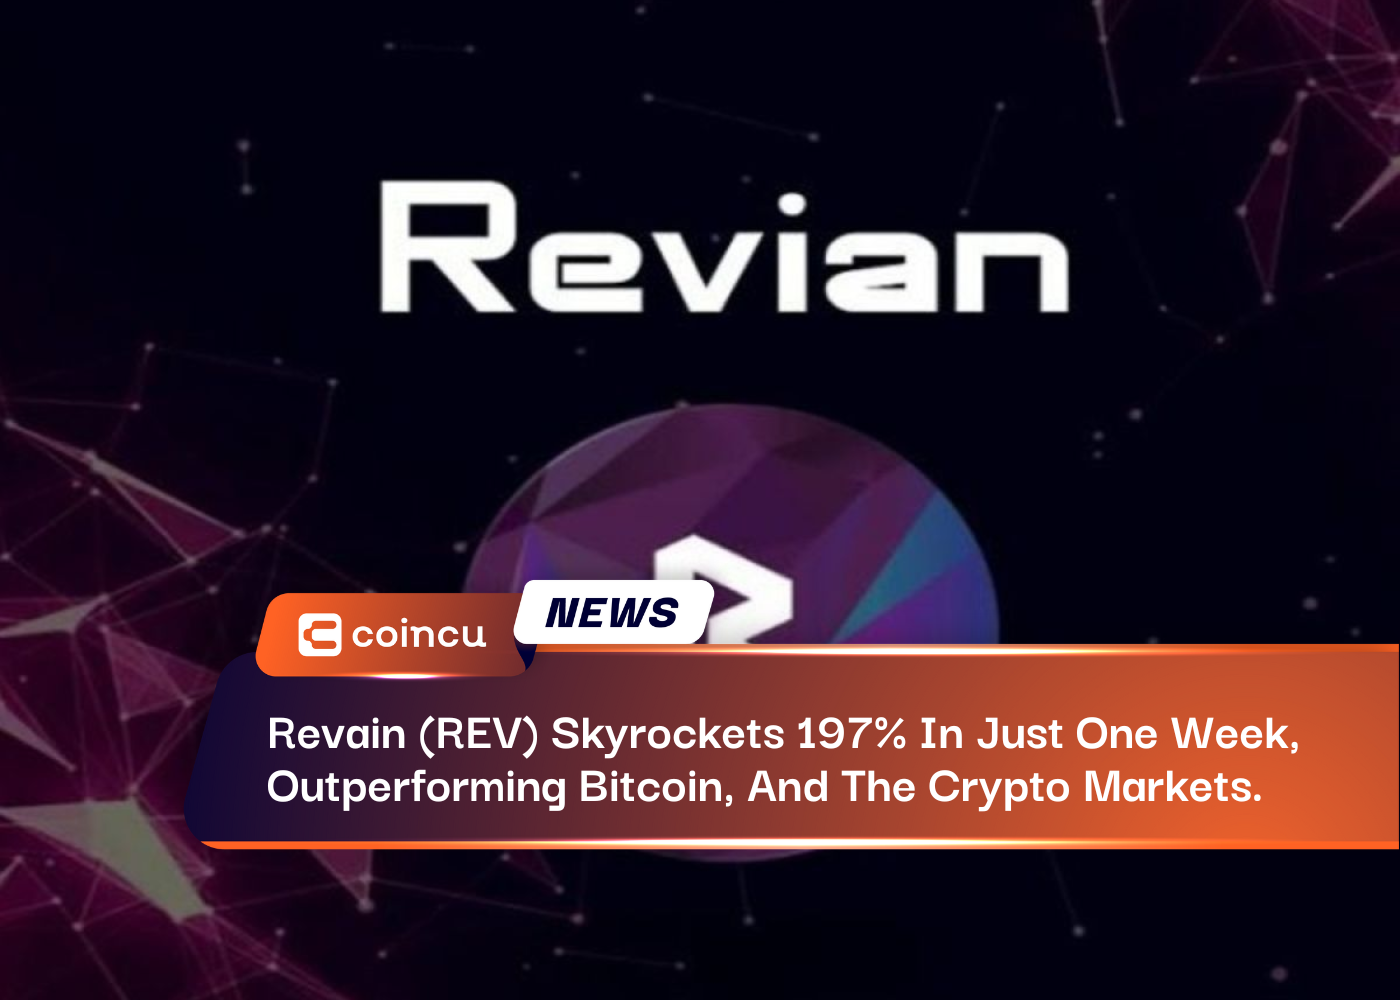 Revain (REV) Skyrockets 197% In Just One Week, Outperforming Bitcoin, Ethereum, And The Crypto Markets.Revain (REV) Skyrockets 197% In Just One Week, Outperforming Bitcoin, Ethereum, And The Crypto Markets.